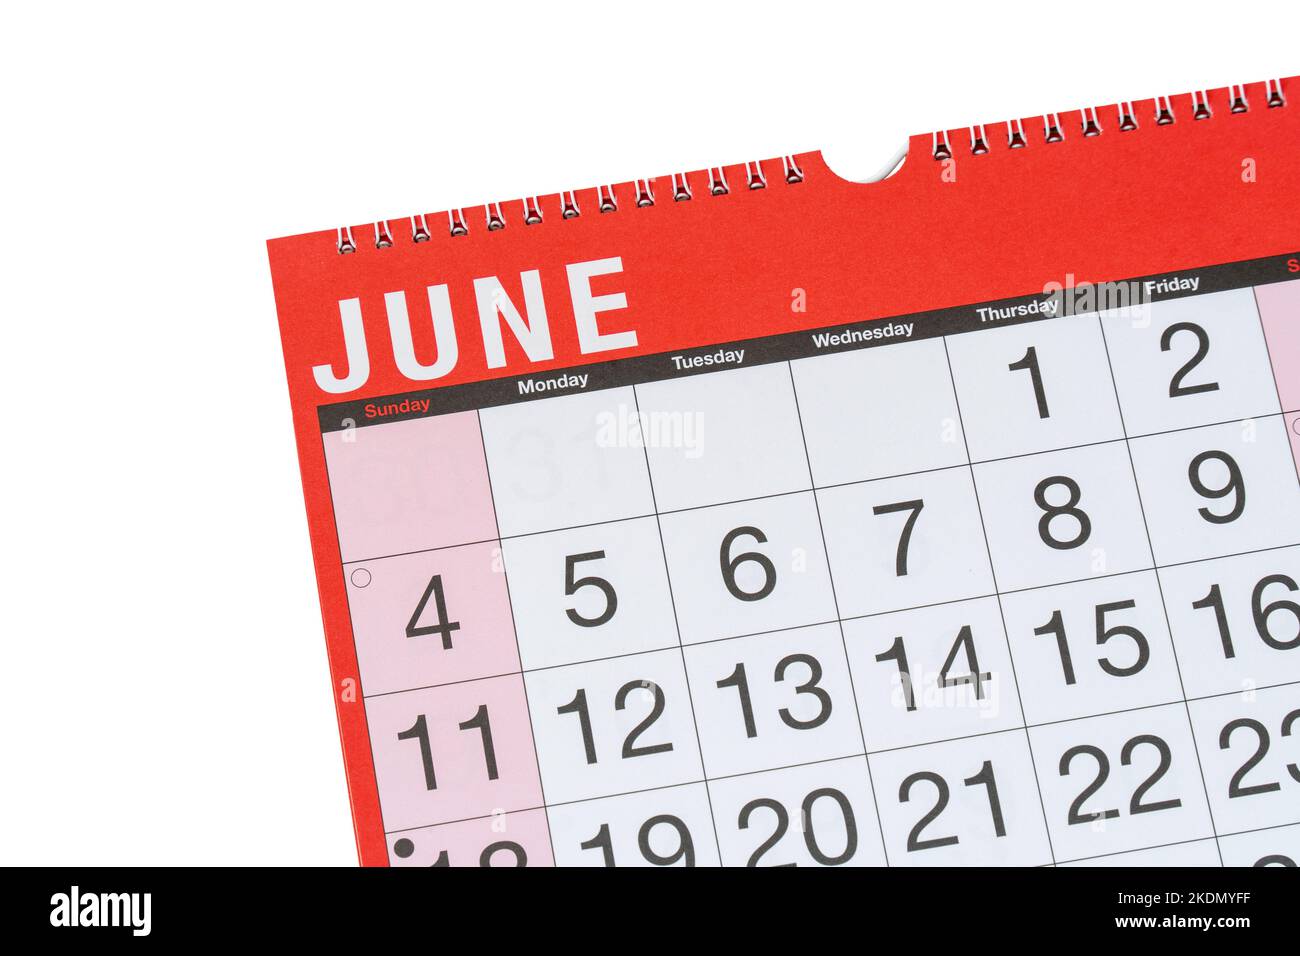 Calendar concept, month and dates with June selected Stock Photo